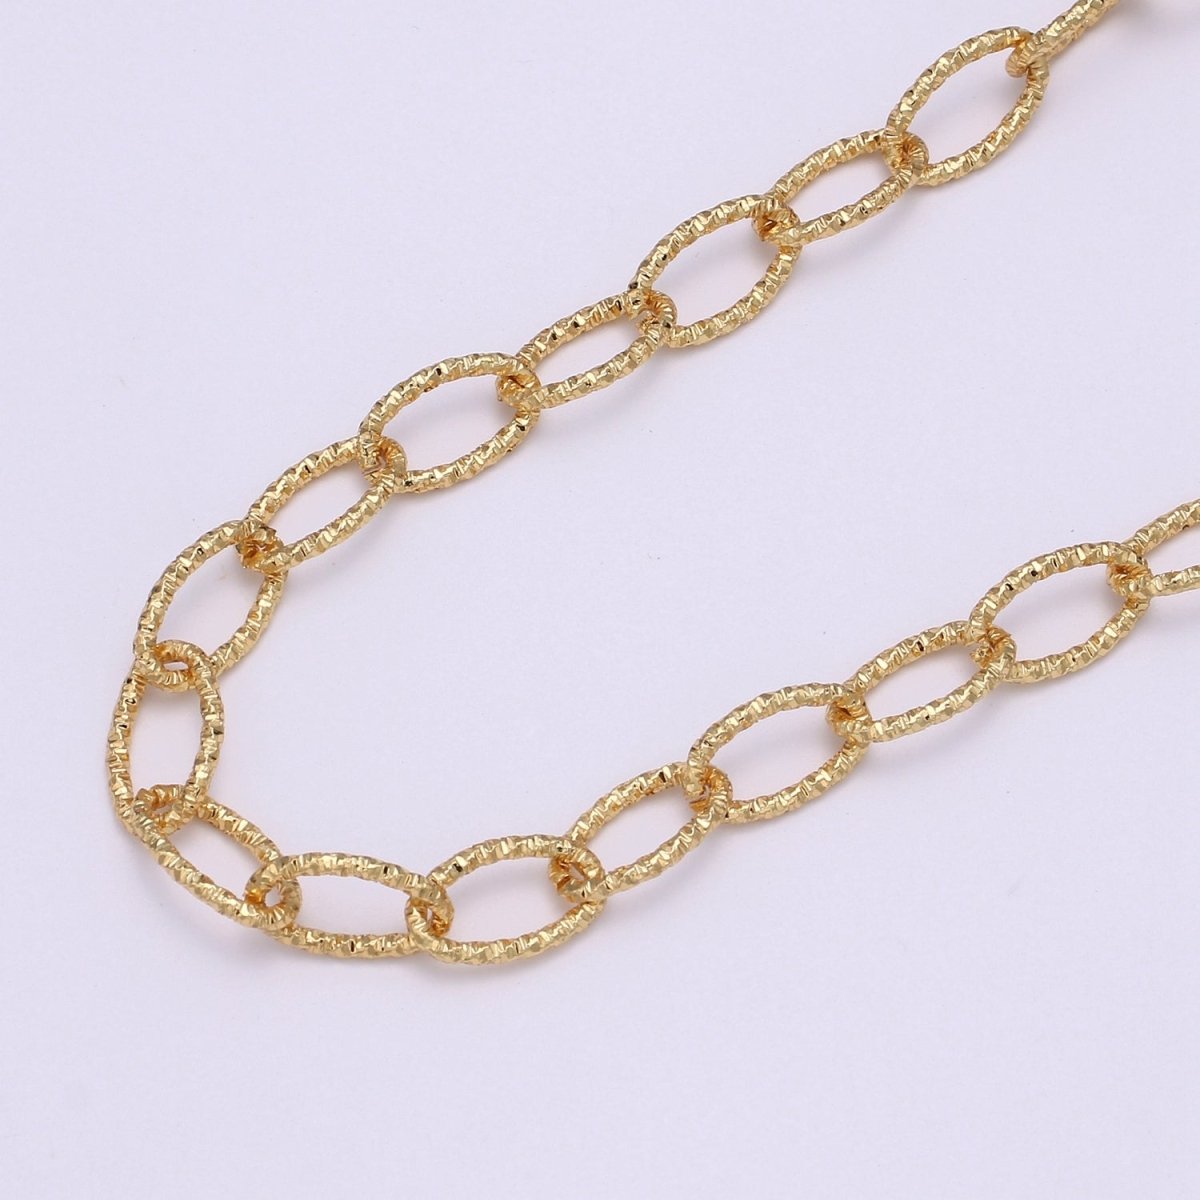 Gold Oval UNIQUE CABLE Special Design Chain by Yard, Fancy Wholesale Bulk Roll Chain For Jewelry Making, Width 9.4mm, 24K Gold Filled For Necklace Bracelet Anklet Component Supply | ROLL-492 Clearance Pricing - DLUXCA